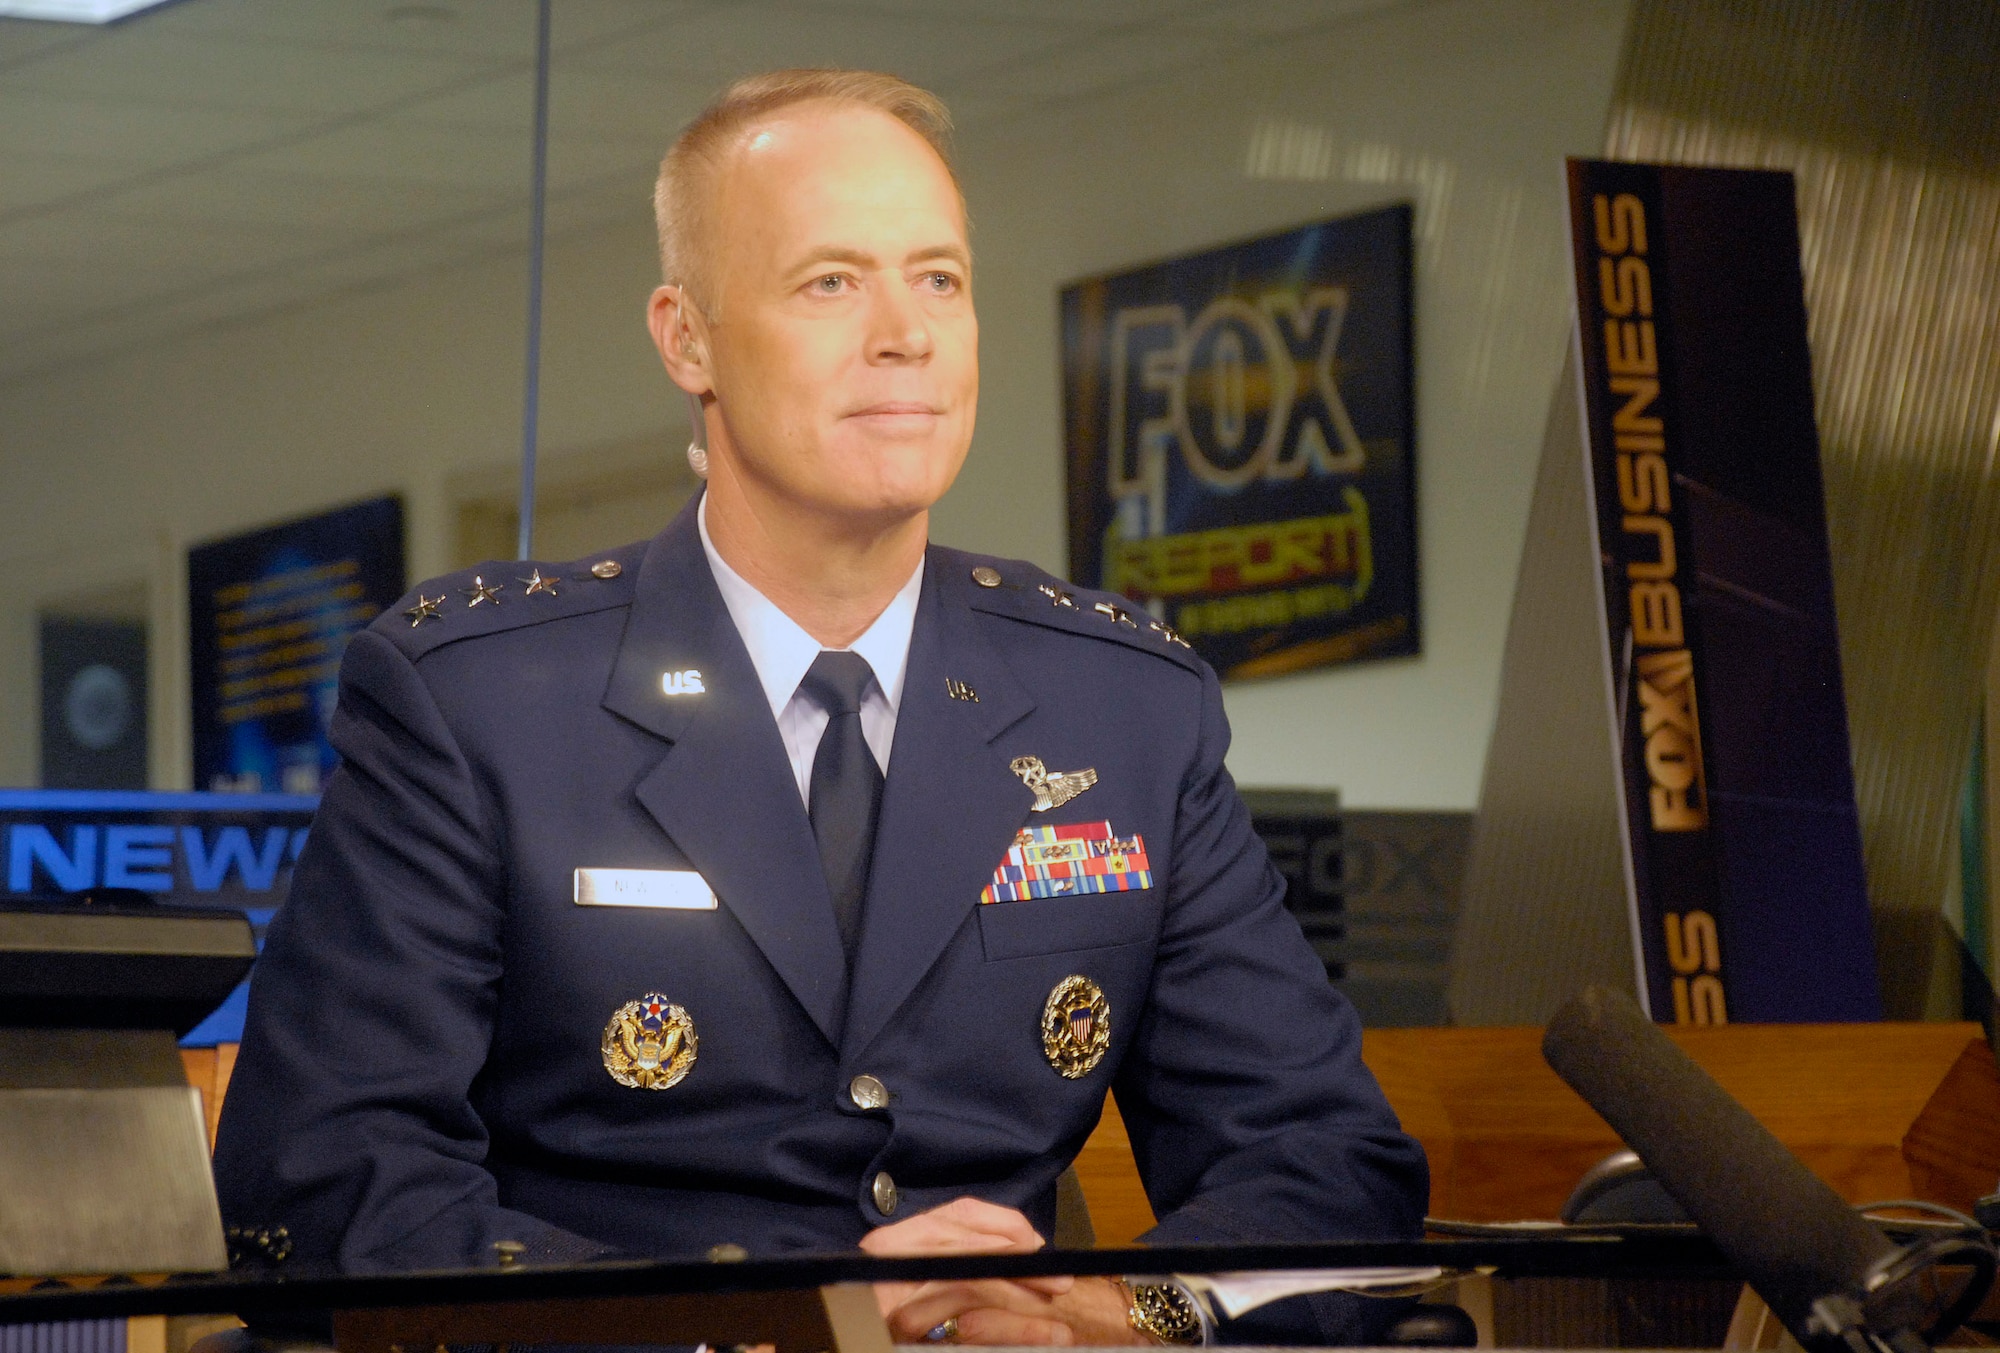 Lt. Gen. Richard Y. Newton III talks about "Warrior Care Month" during an interview with Fox News Nov. 10 in New York City. General Newton is the deputy chief of staff for manpower, personnel and services at the Pentagon. (U.S. Air Force photo/Staff Sgt. Monique Randolph) 
